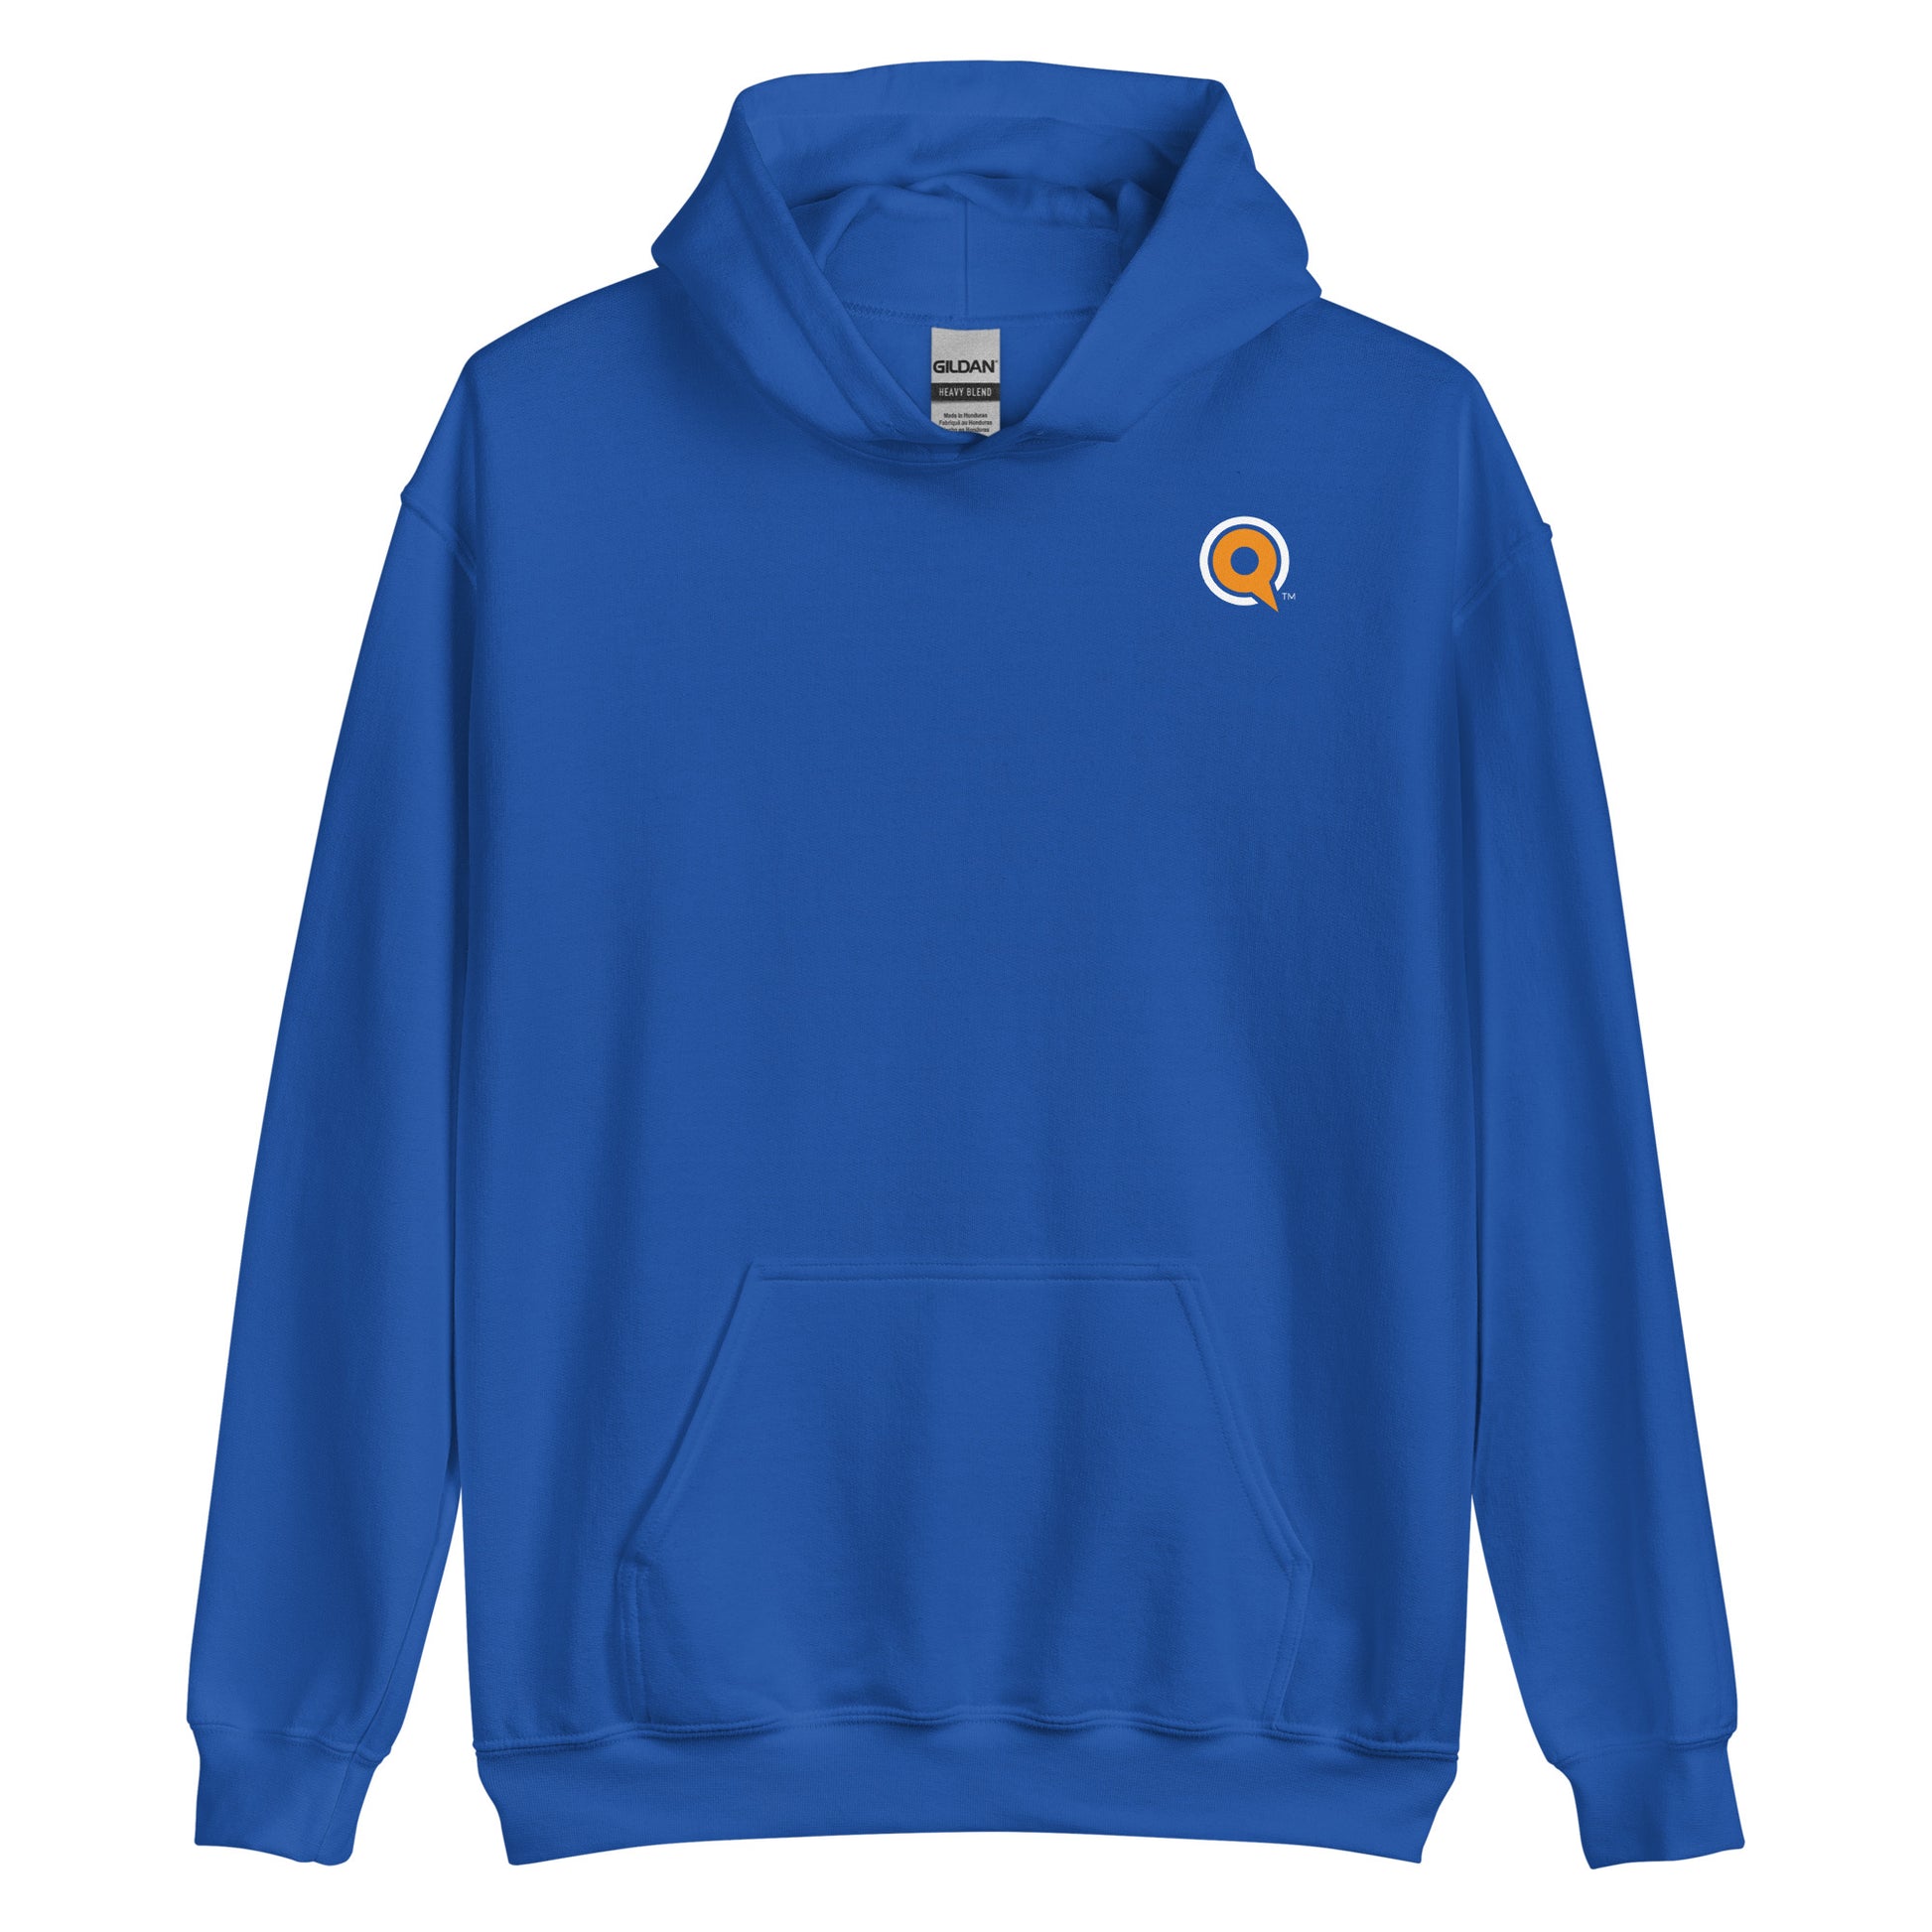 Yaqeen Q hoodie in Blue